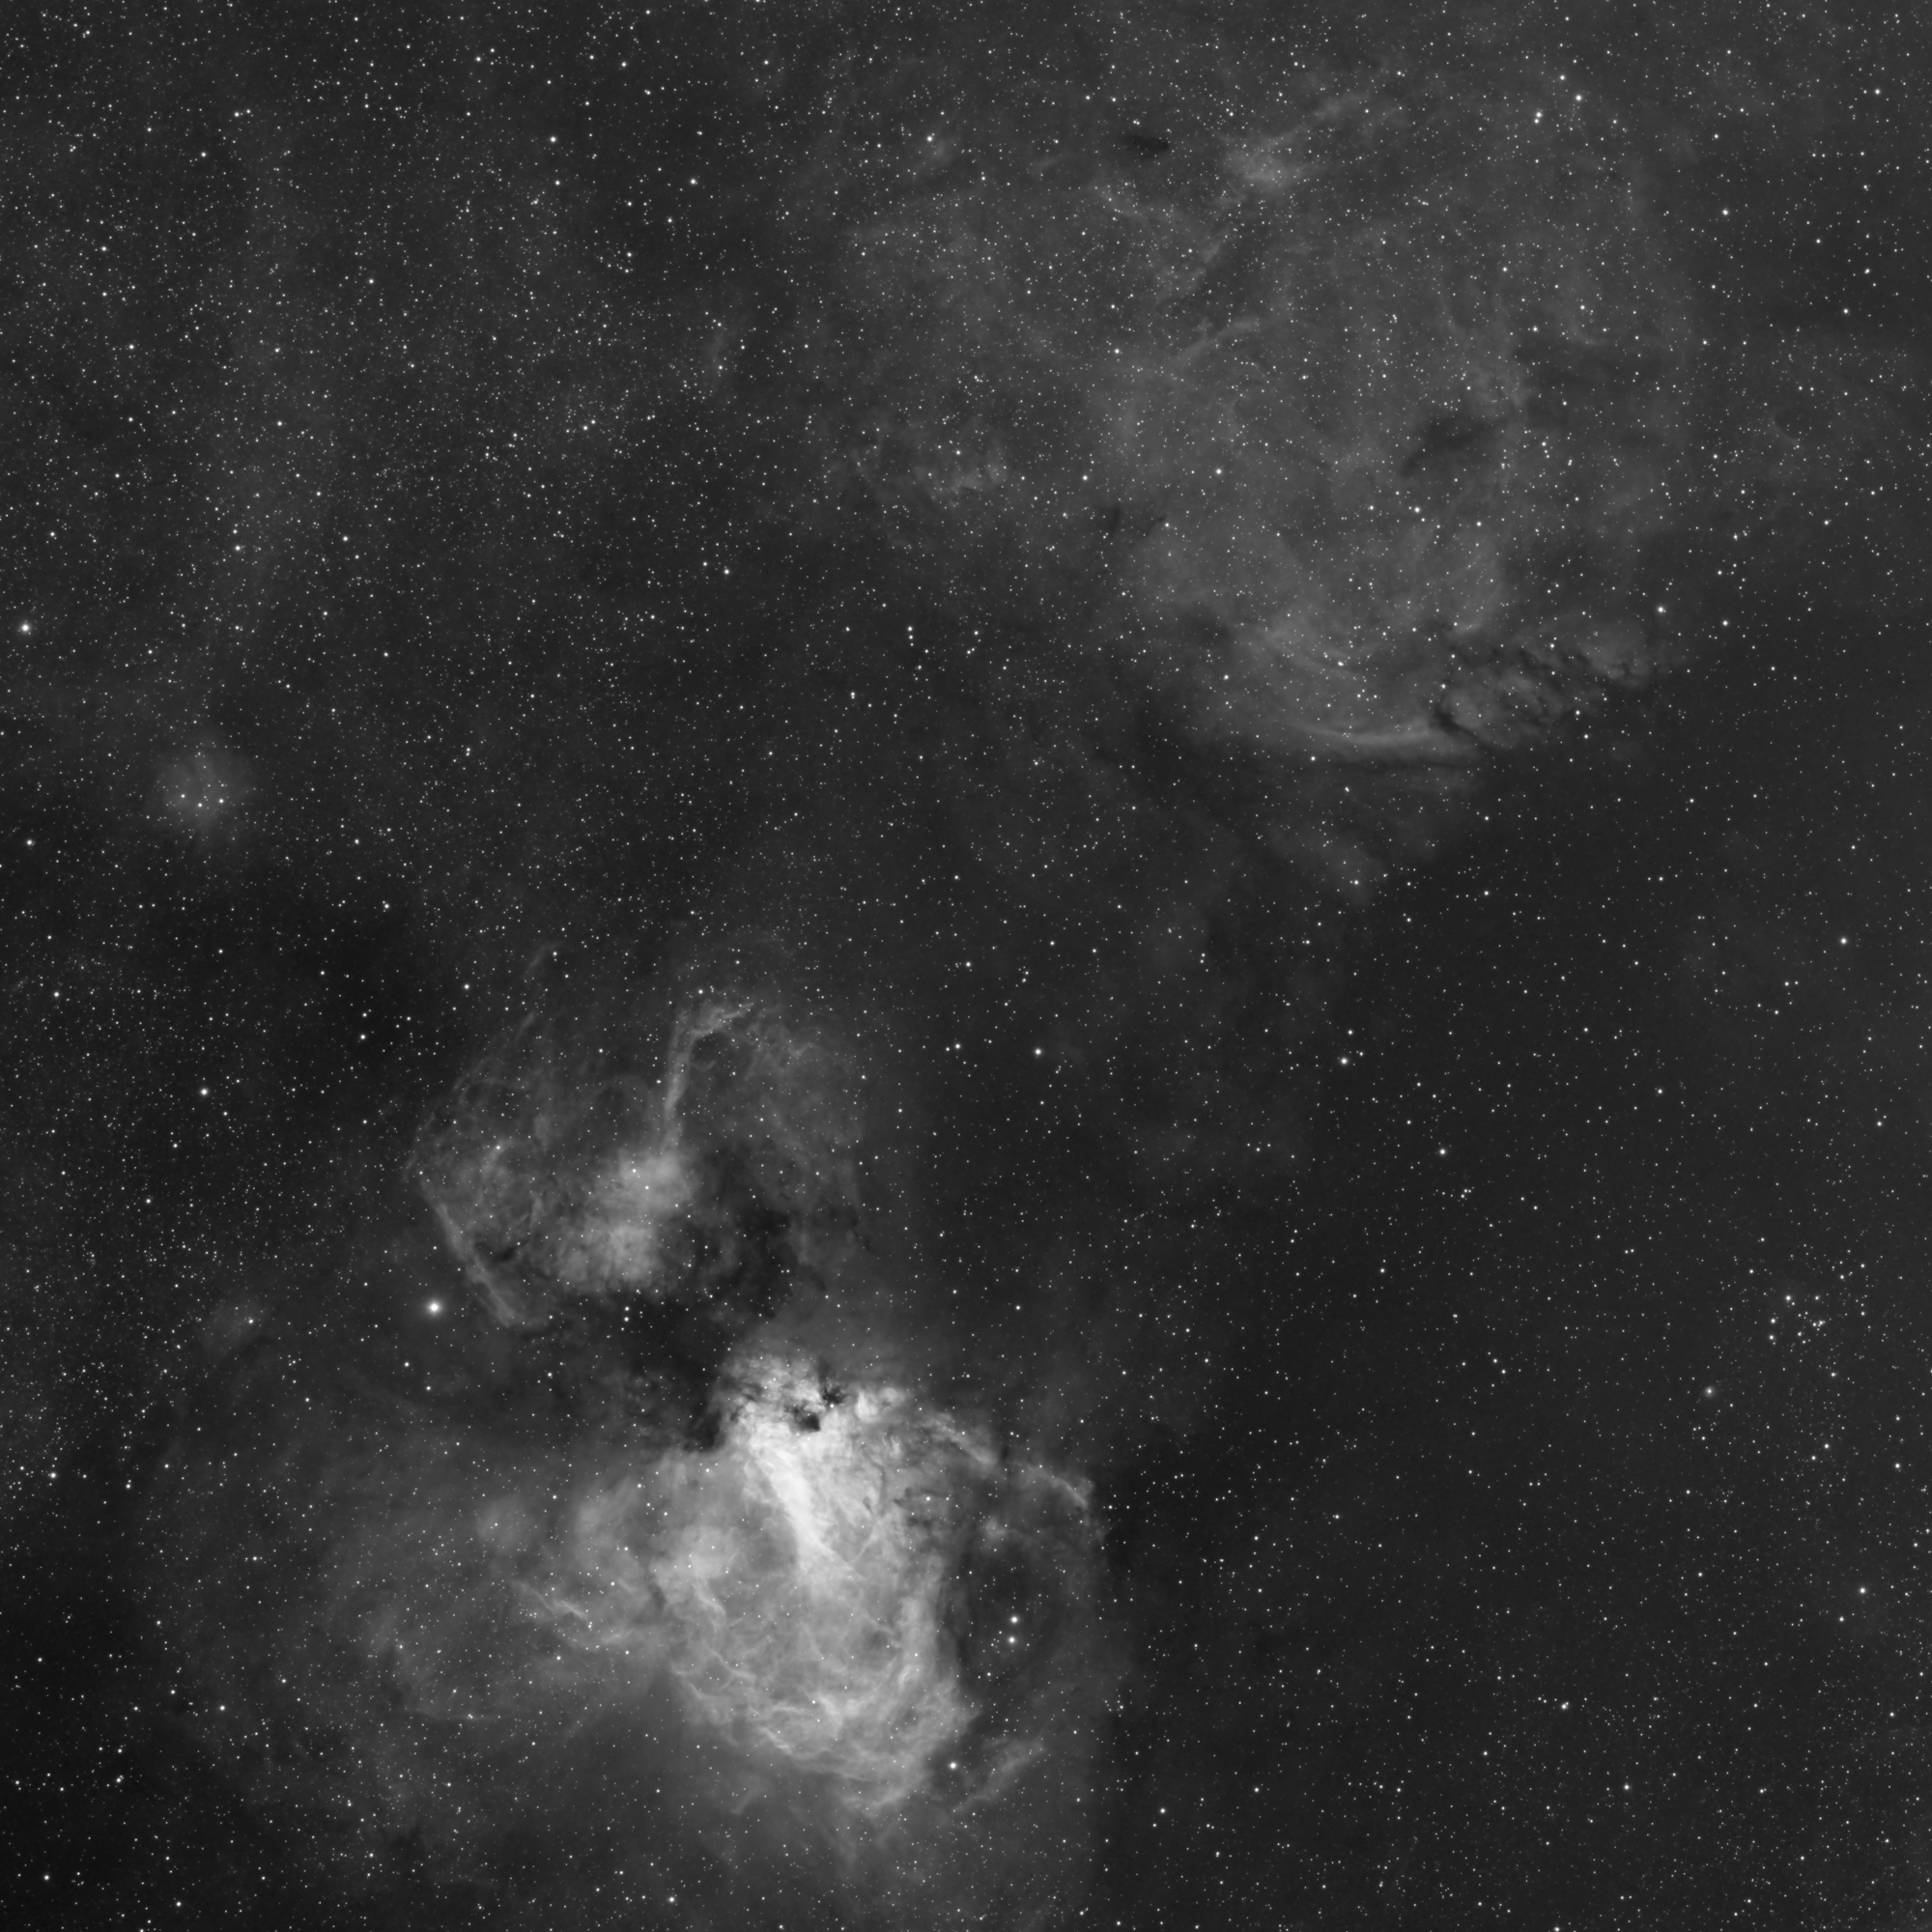 M17 and Sh2 40 in H-Alpha